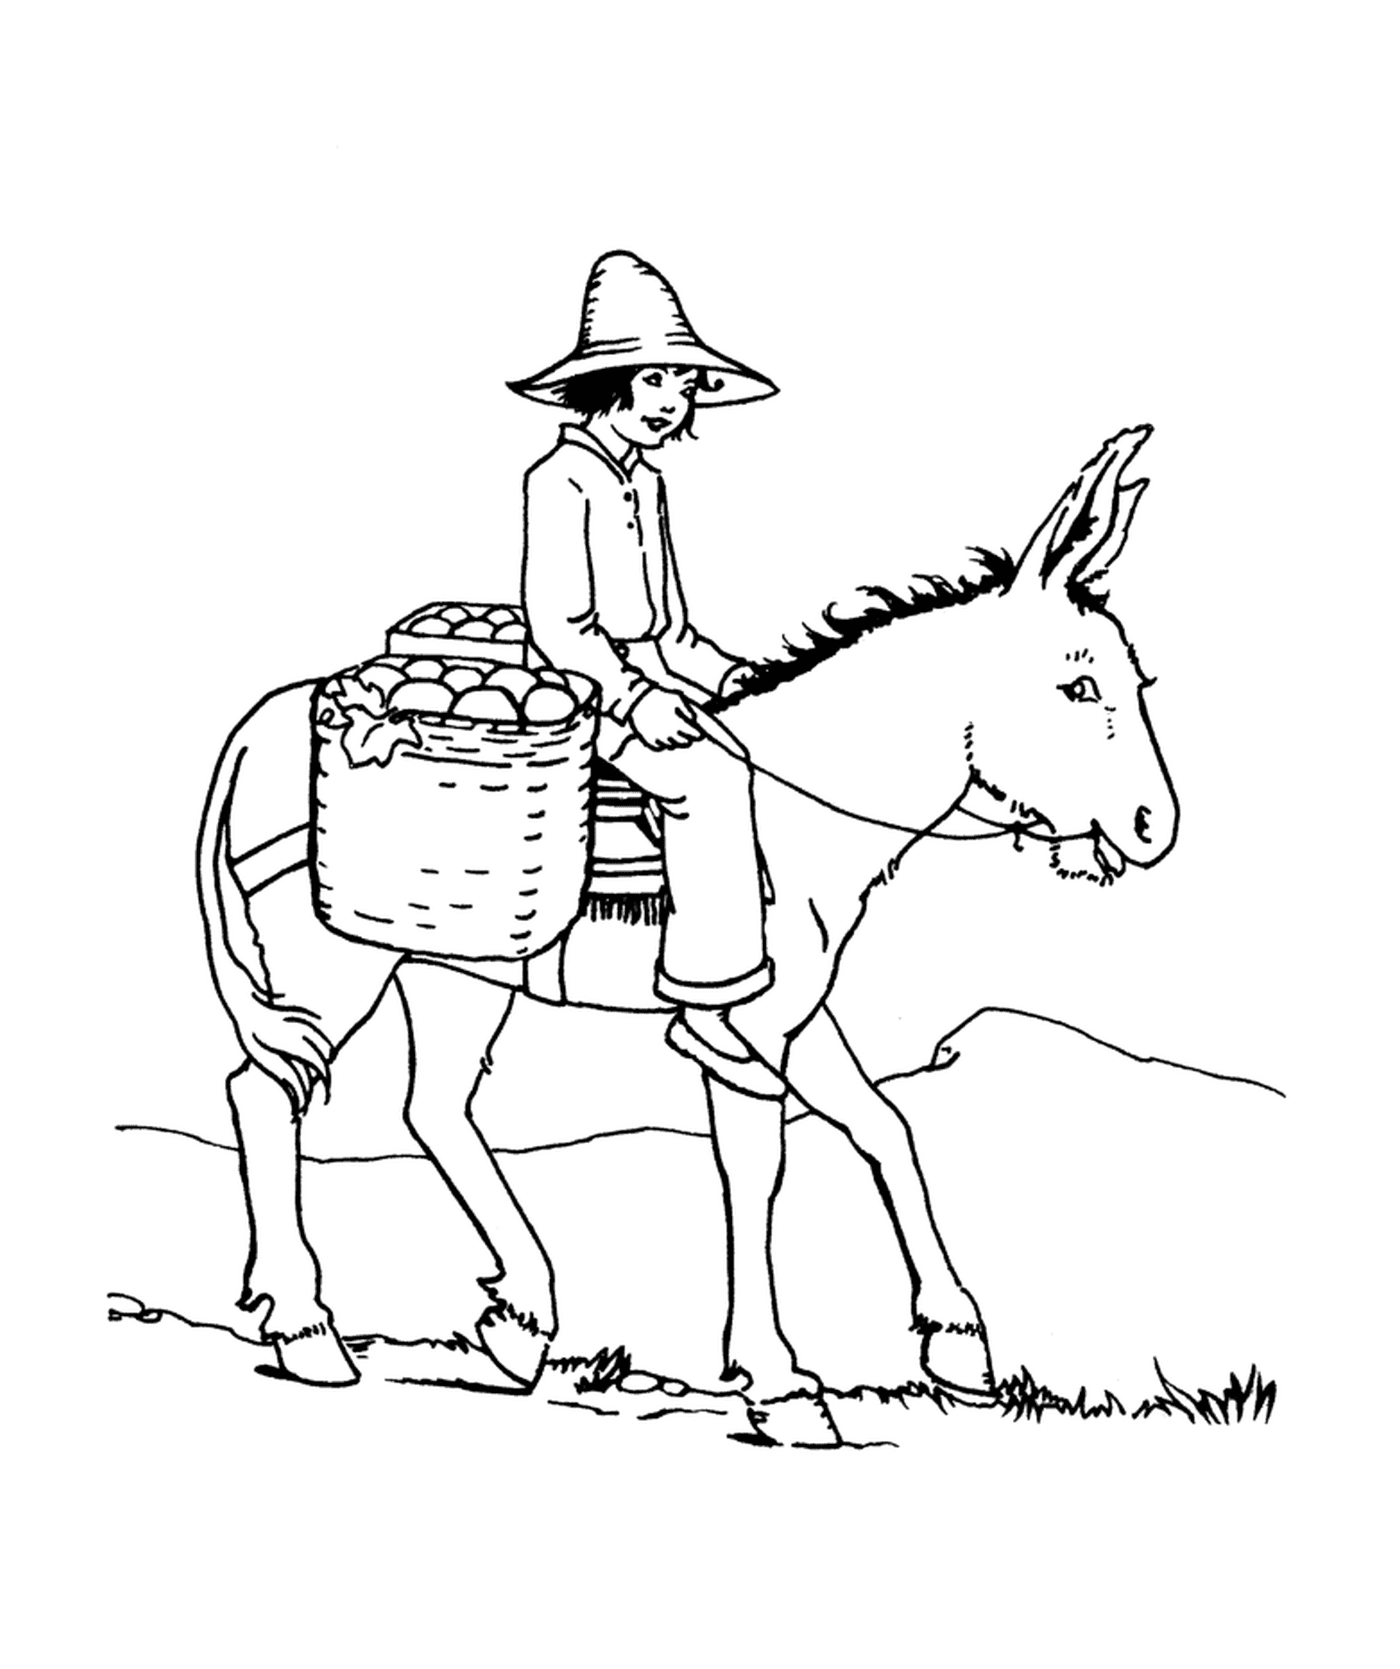  A man riding a donkey with a basket on his back 